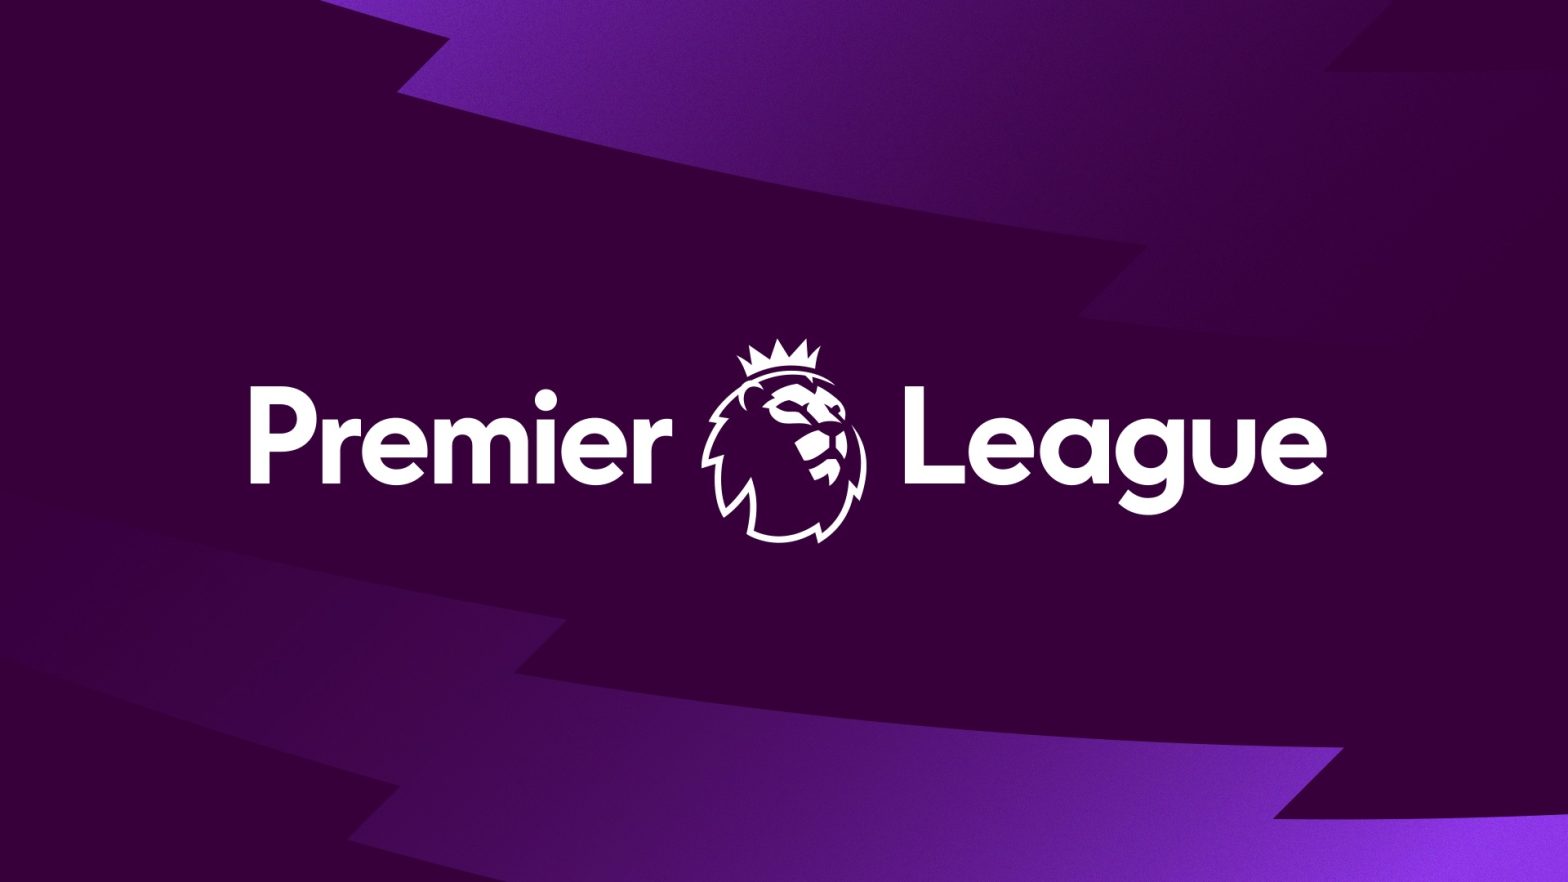 English Premier League – Types of bets and markets